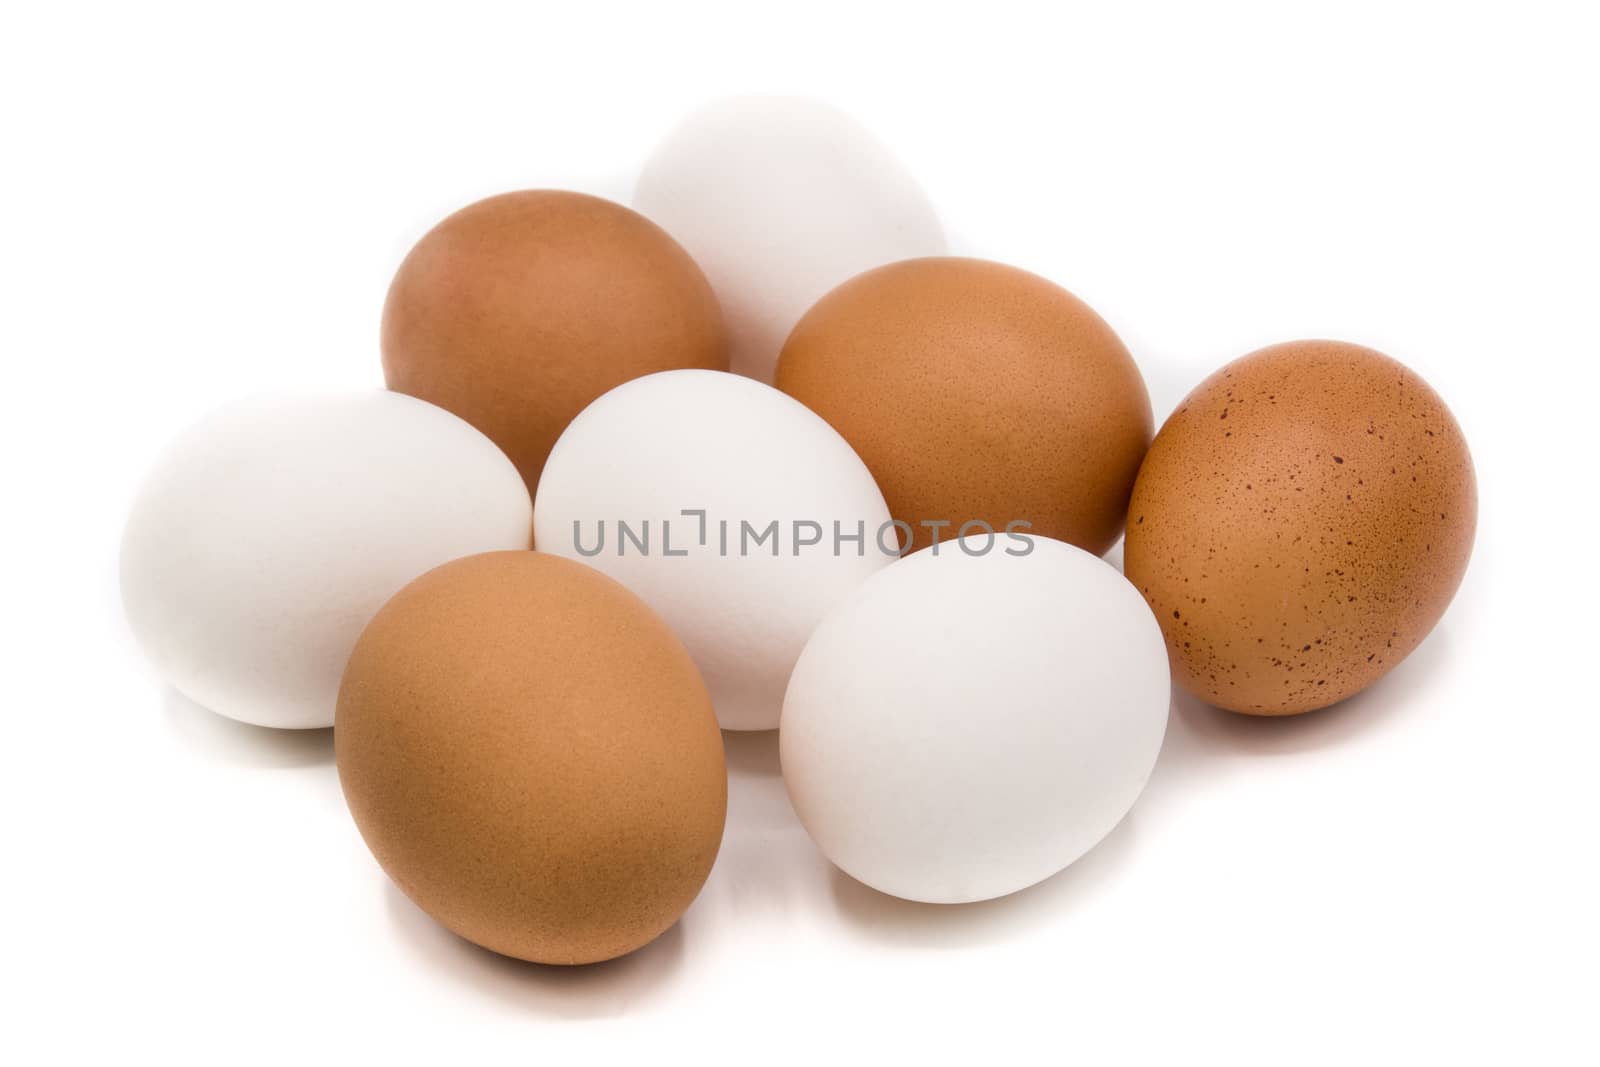 Brown and white eggs by chandlervid85